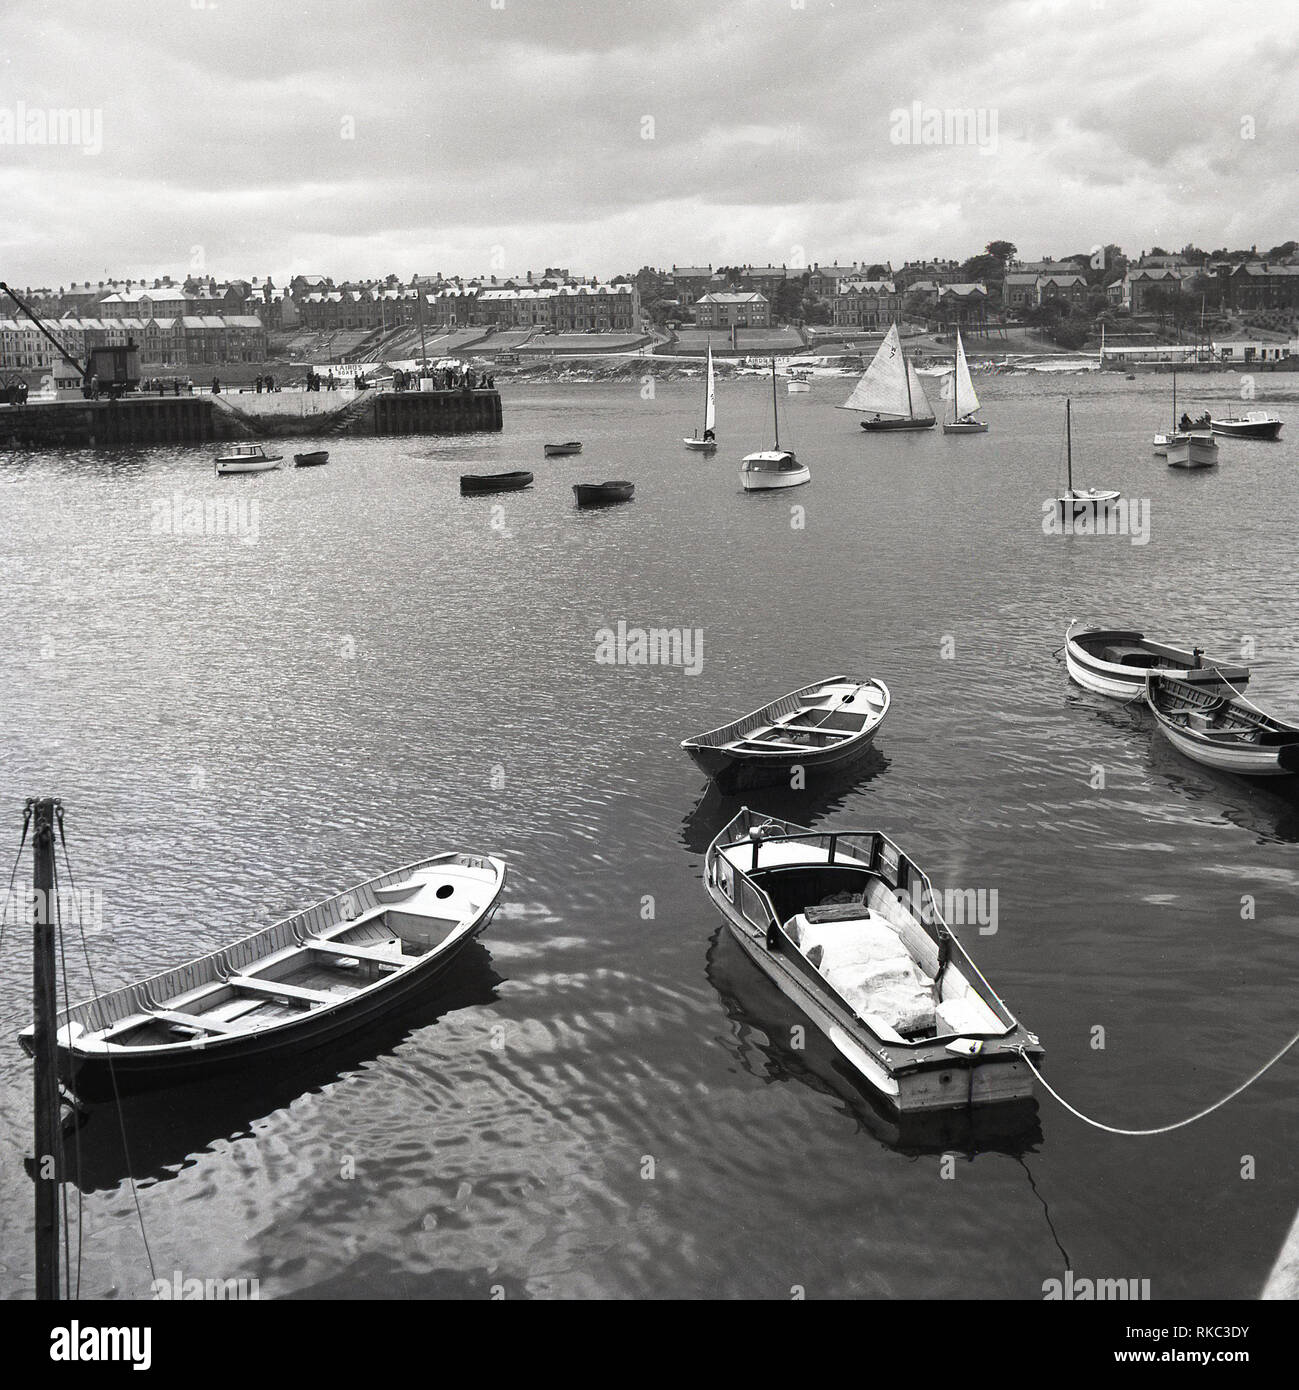 1950s, historical, a view of the harbour or marina at Bangor, Northern Ireland showing the boats and landscape. In the distance a sign for 'Lairds Boats'. Bangor is the country's largest marina. Stock Photo